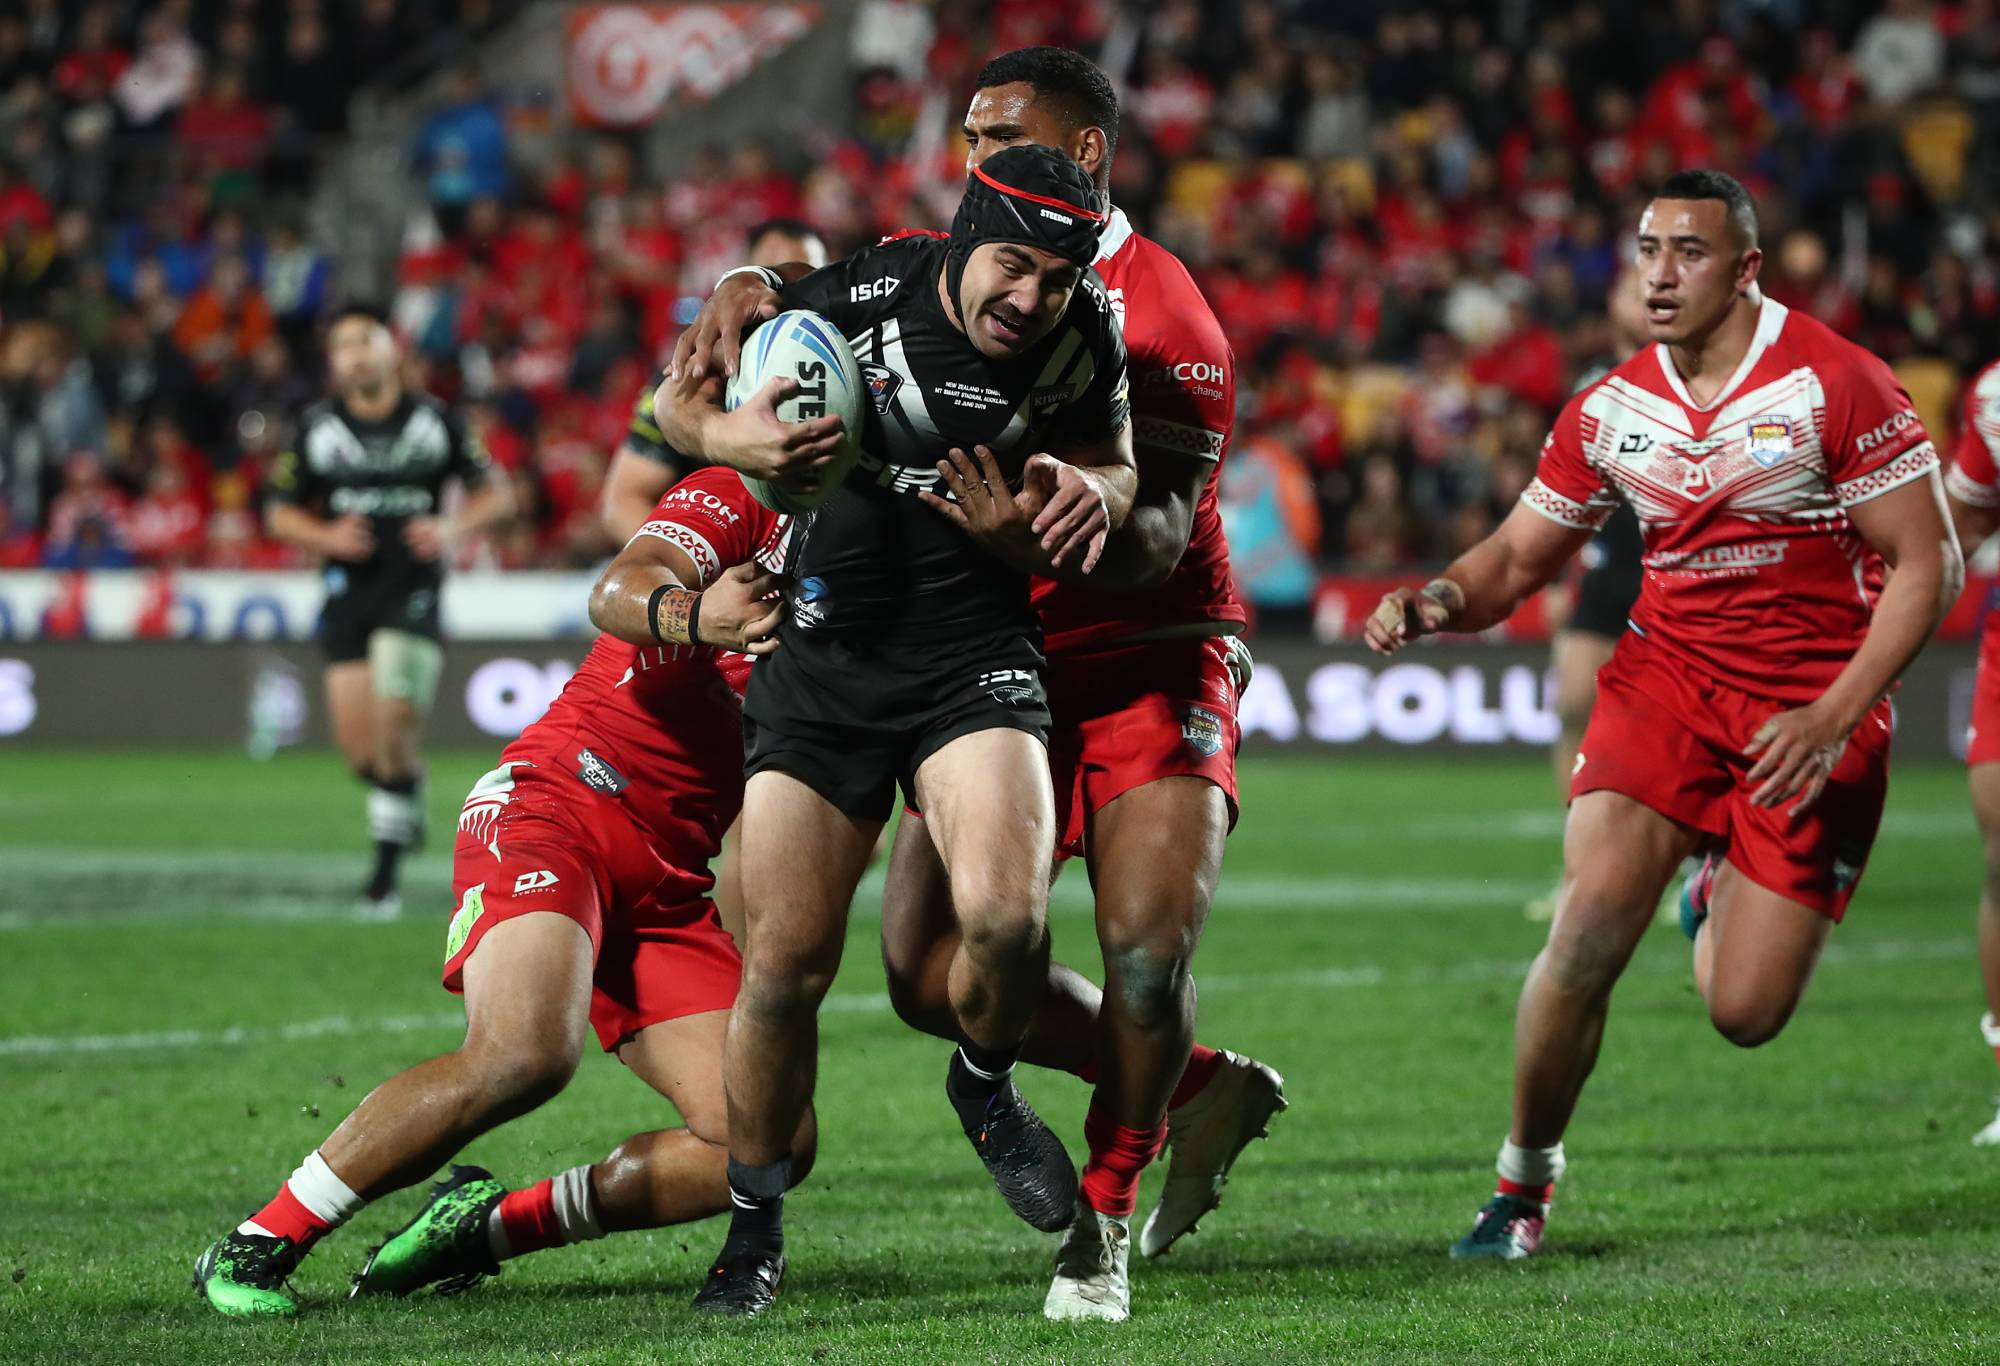 AUCKLAND, NEW ZEALAND - JUNE 22: Jahrome Hughes of the Kiwis scores a try during the Oceania league test between the Kiwis and Mate Ma'a Tonga at Mt Smart Stadium on June 22, 2019 in Auckland, New Zealand. (Photo by Fiona Goodall/Getty Images)